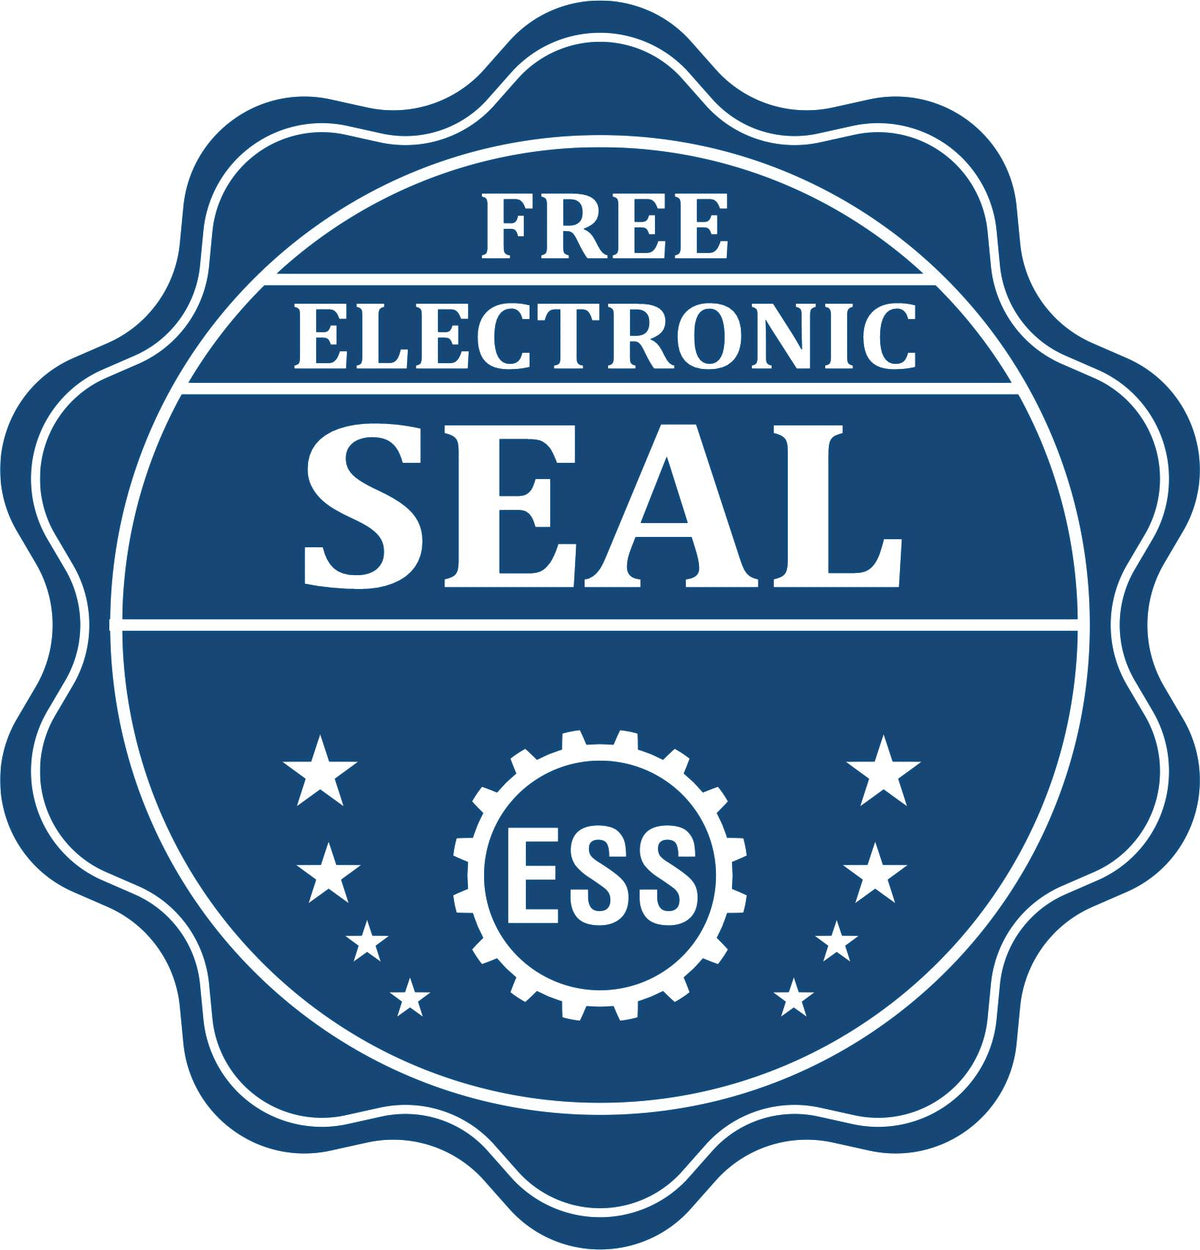 A badge showing a free electronic seal for the Texas Desk Architect Embossing Seal with stars and the ESS gear on the emblem.